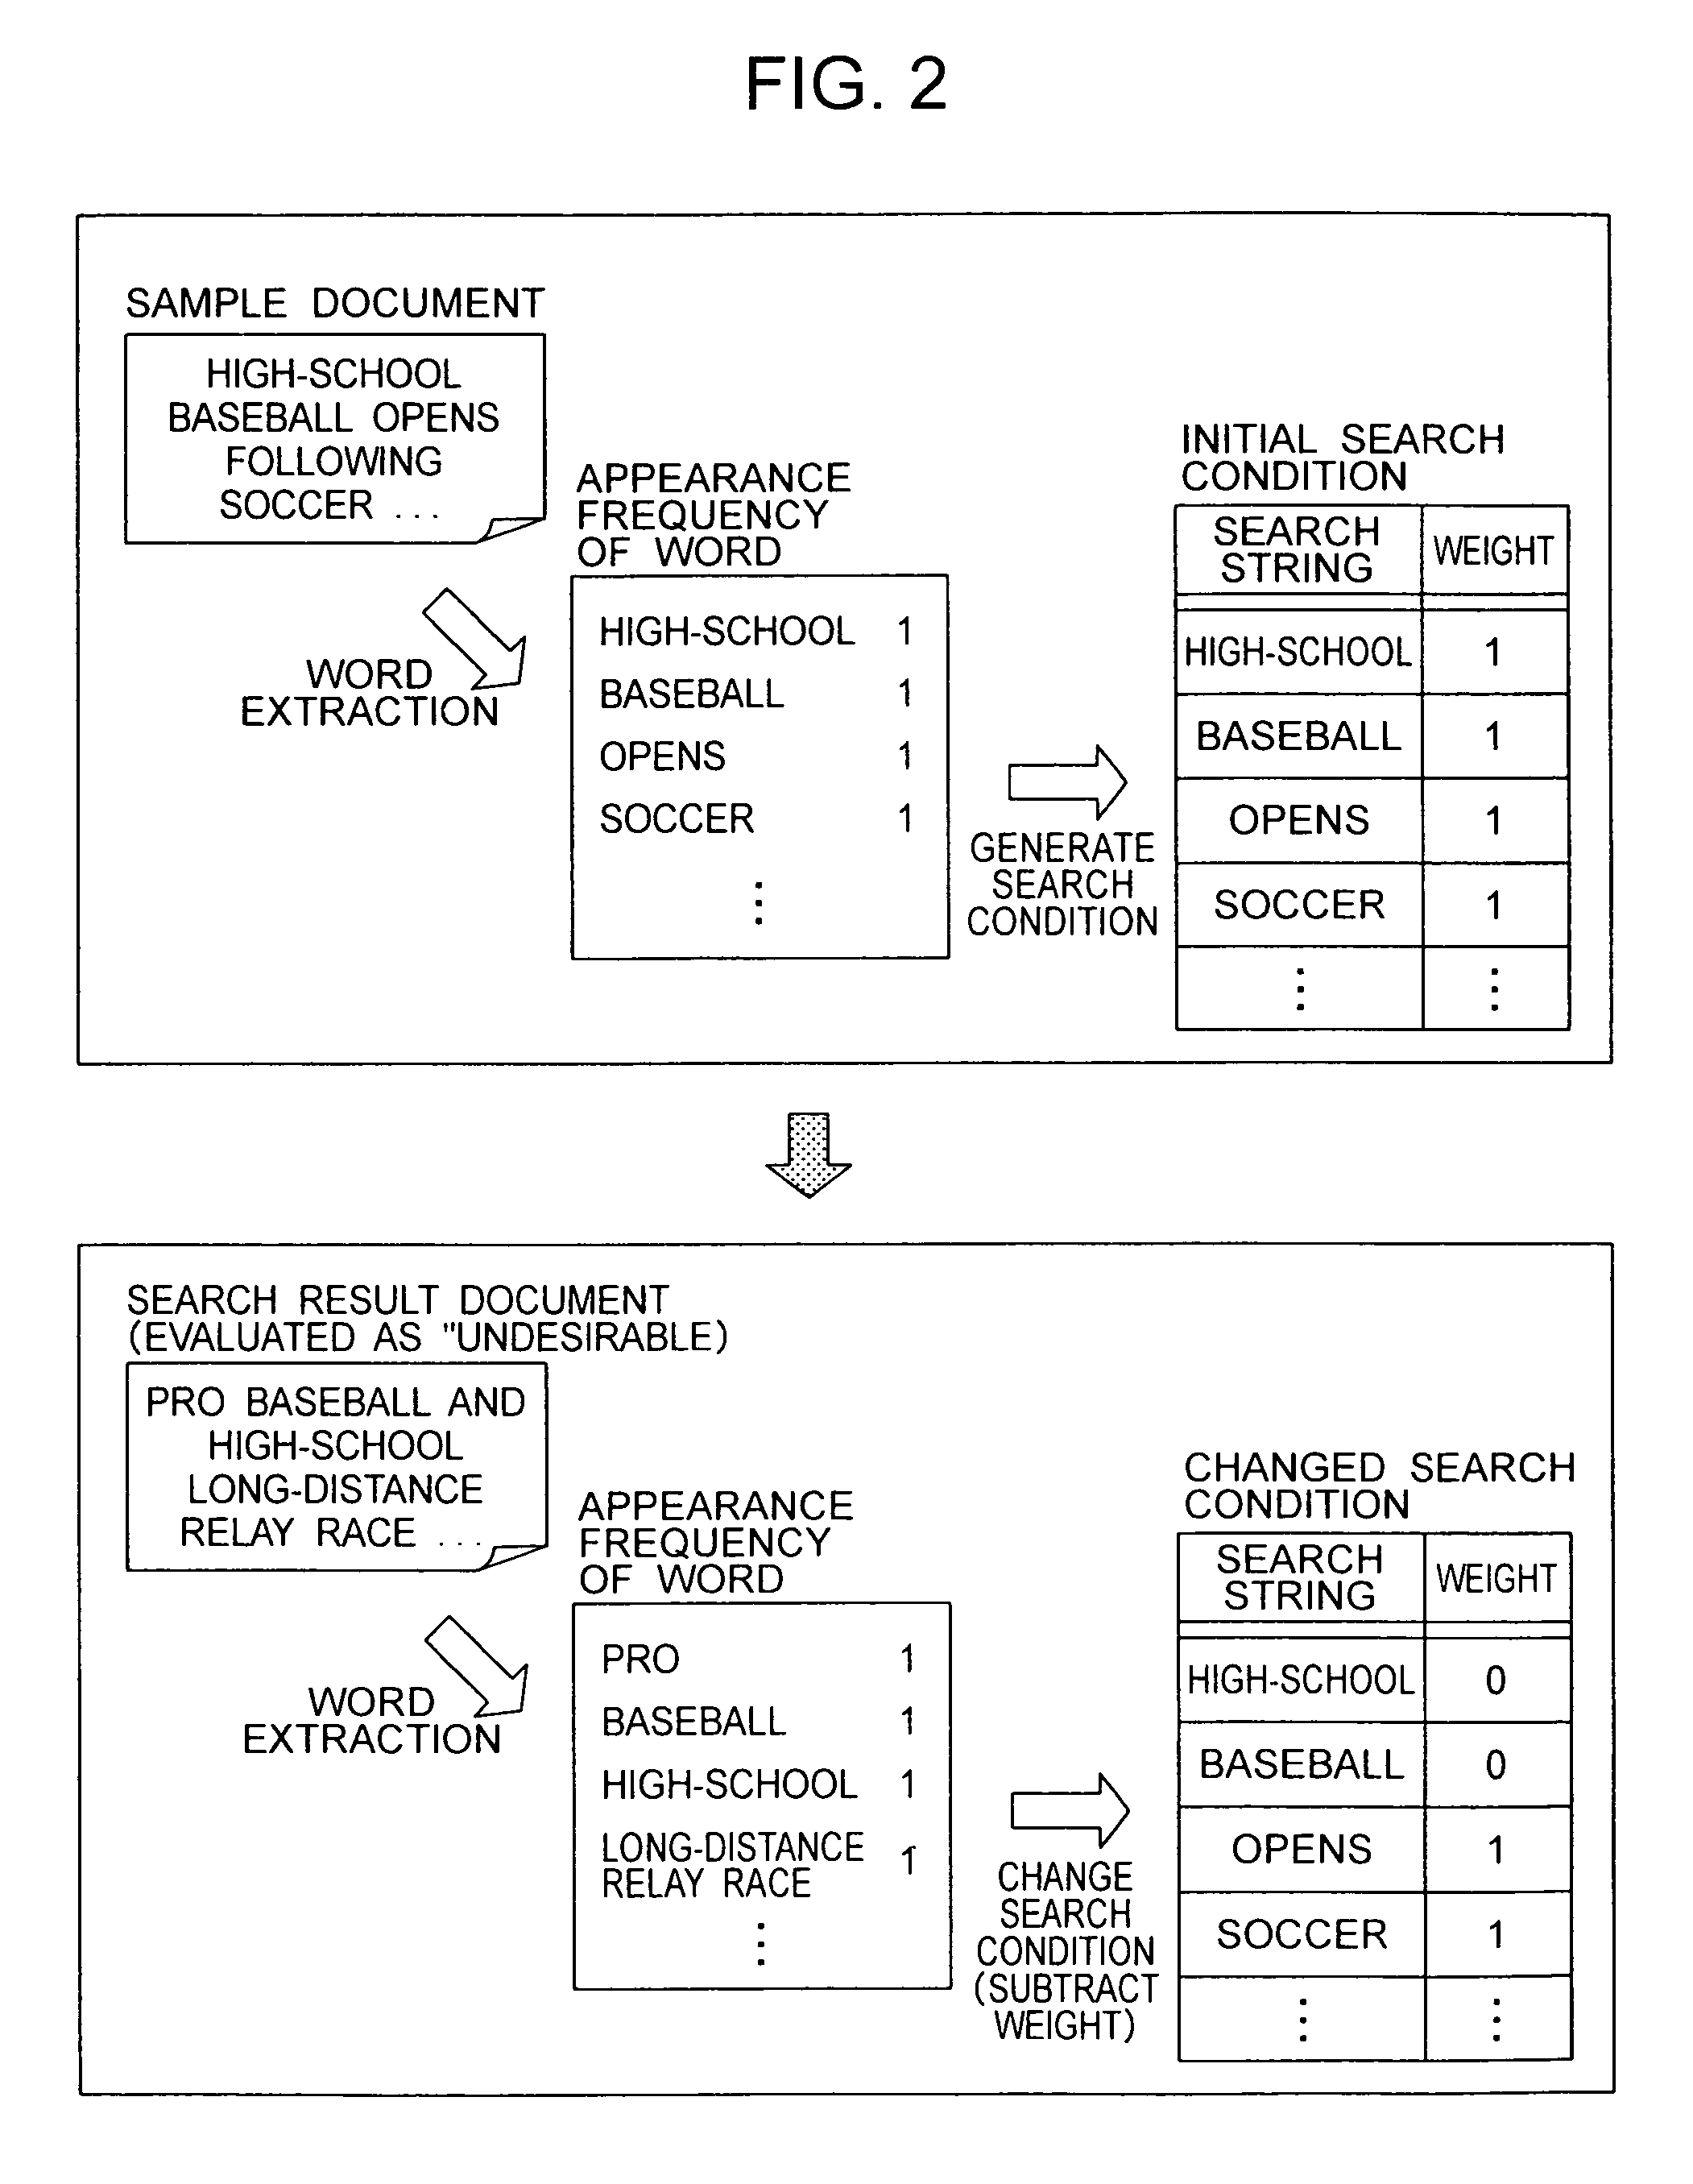 Method and system for retrieving a document and computer readable storage medium